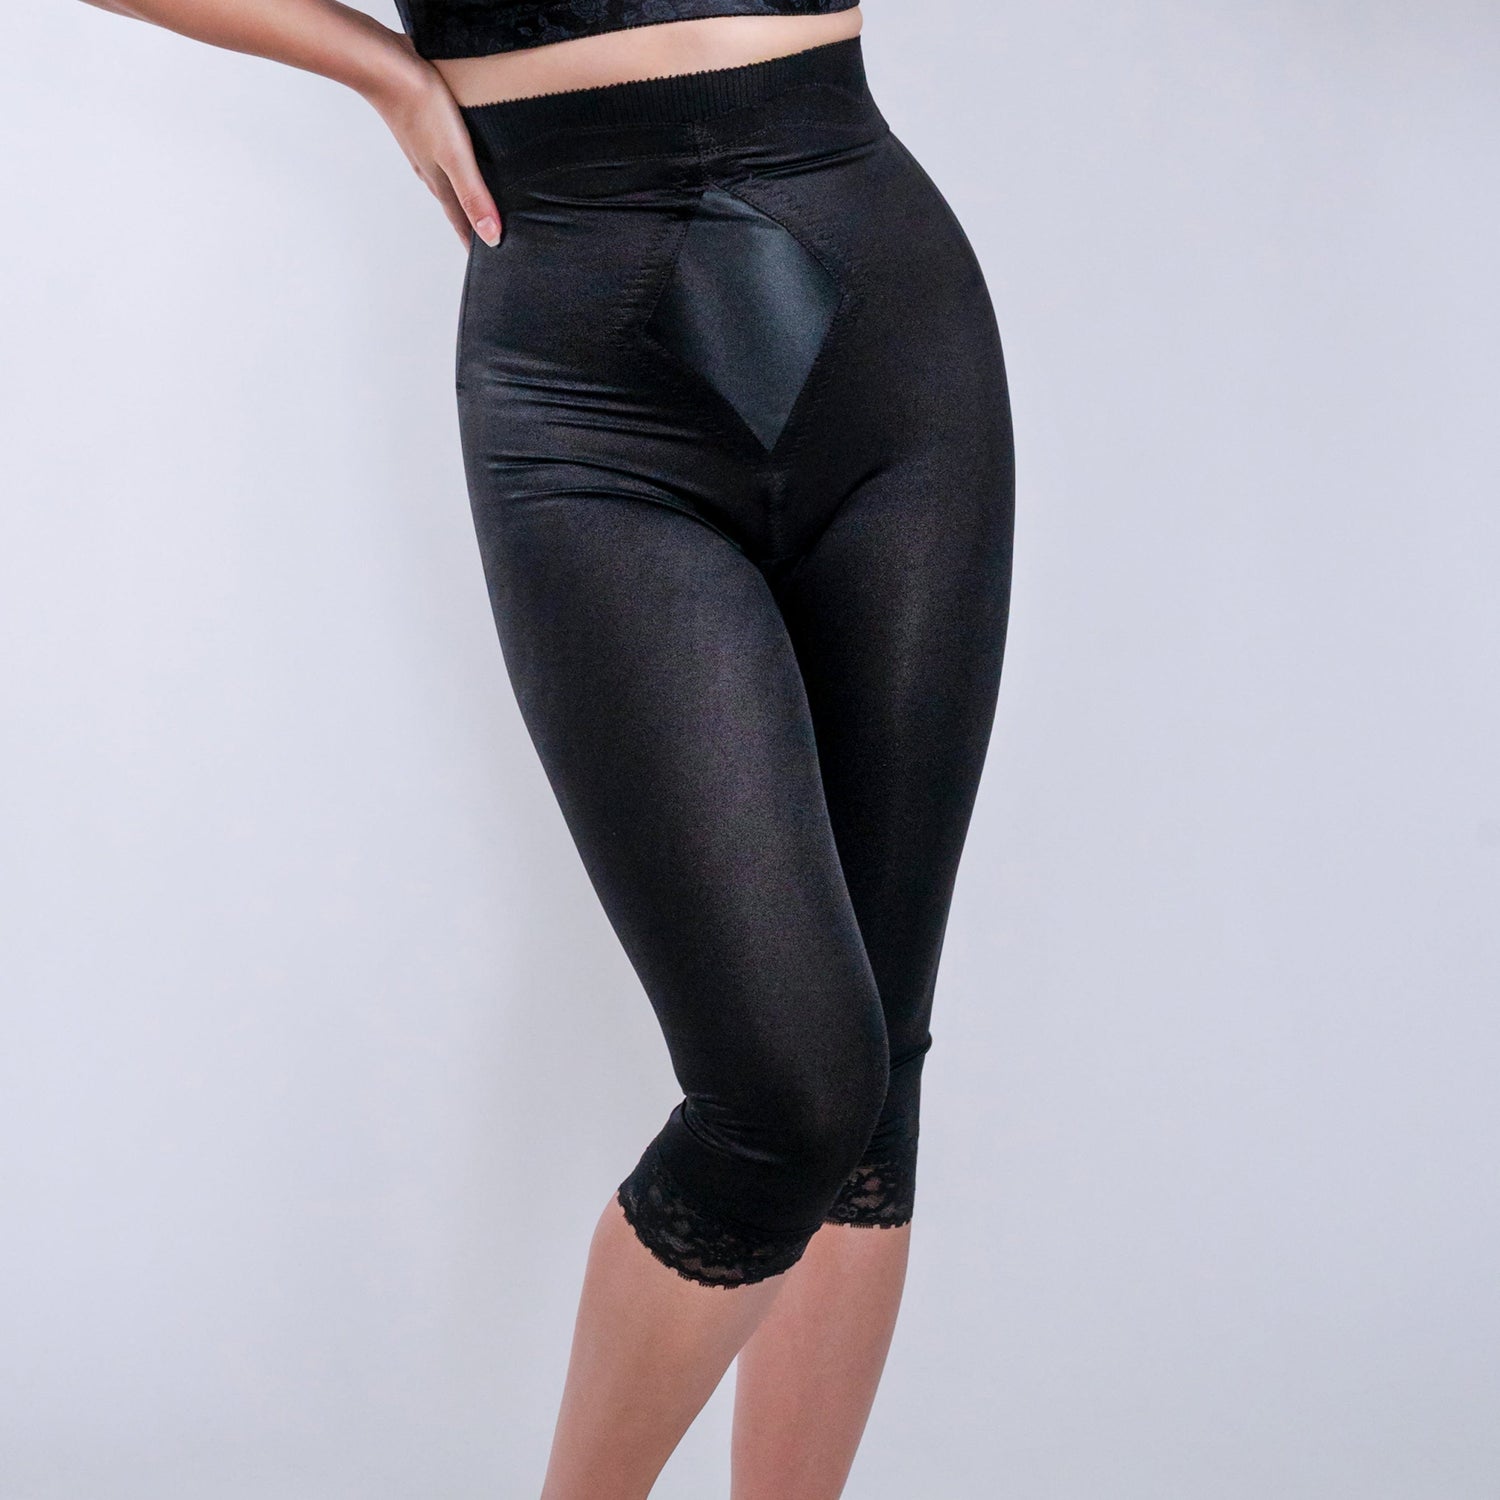 RAGO STYLE 6270 – LEG SHAPER/PANT LINER EXTRA FIRM SHAPING – Body